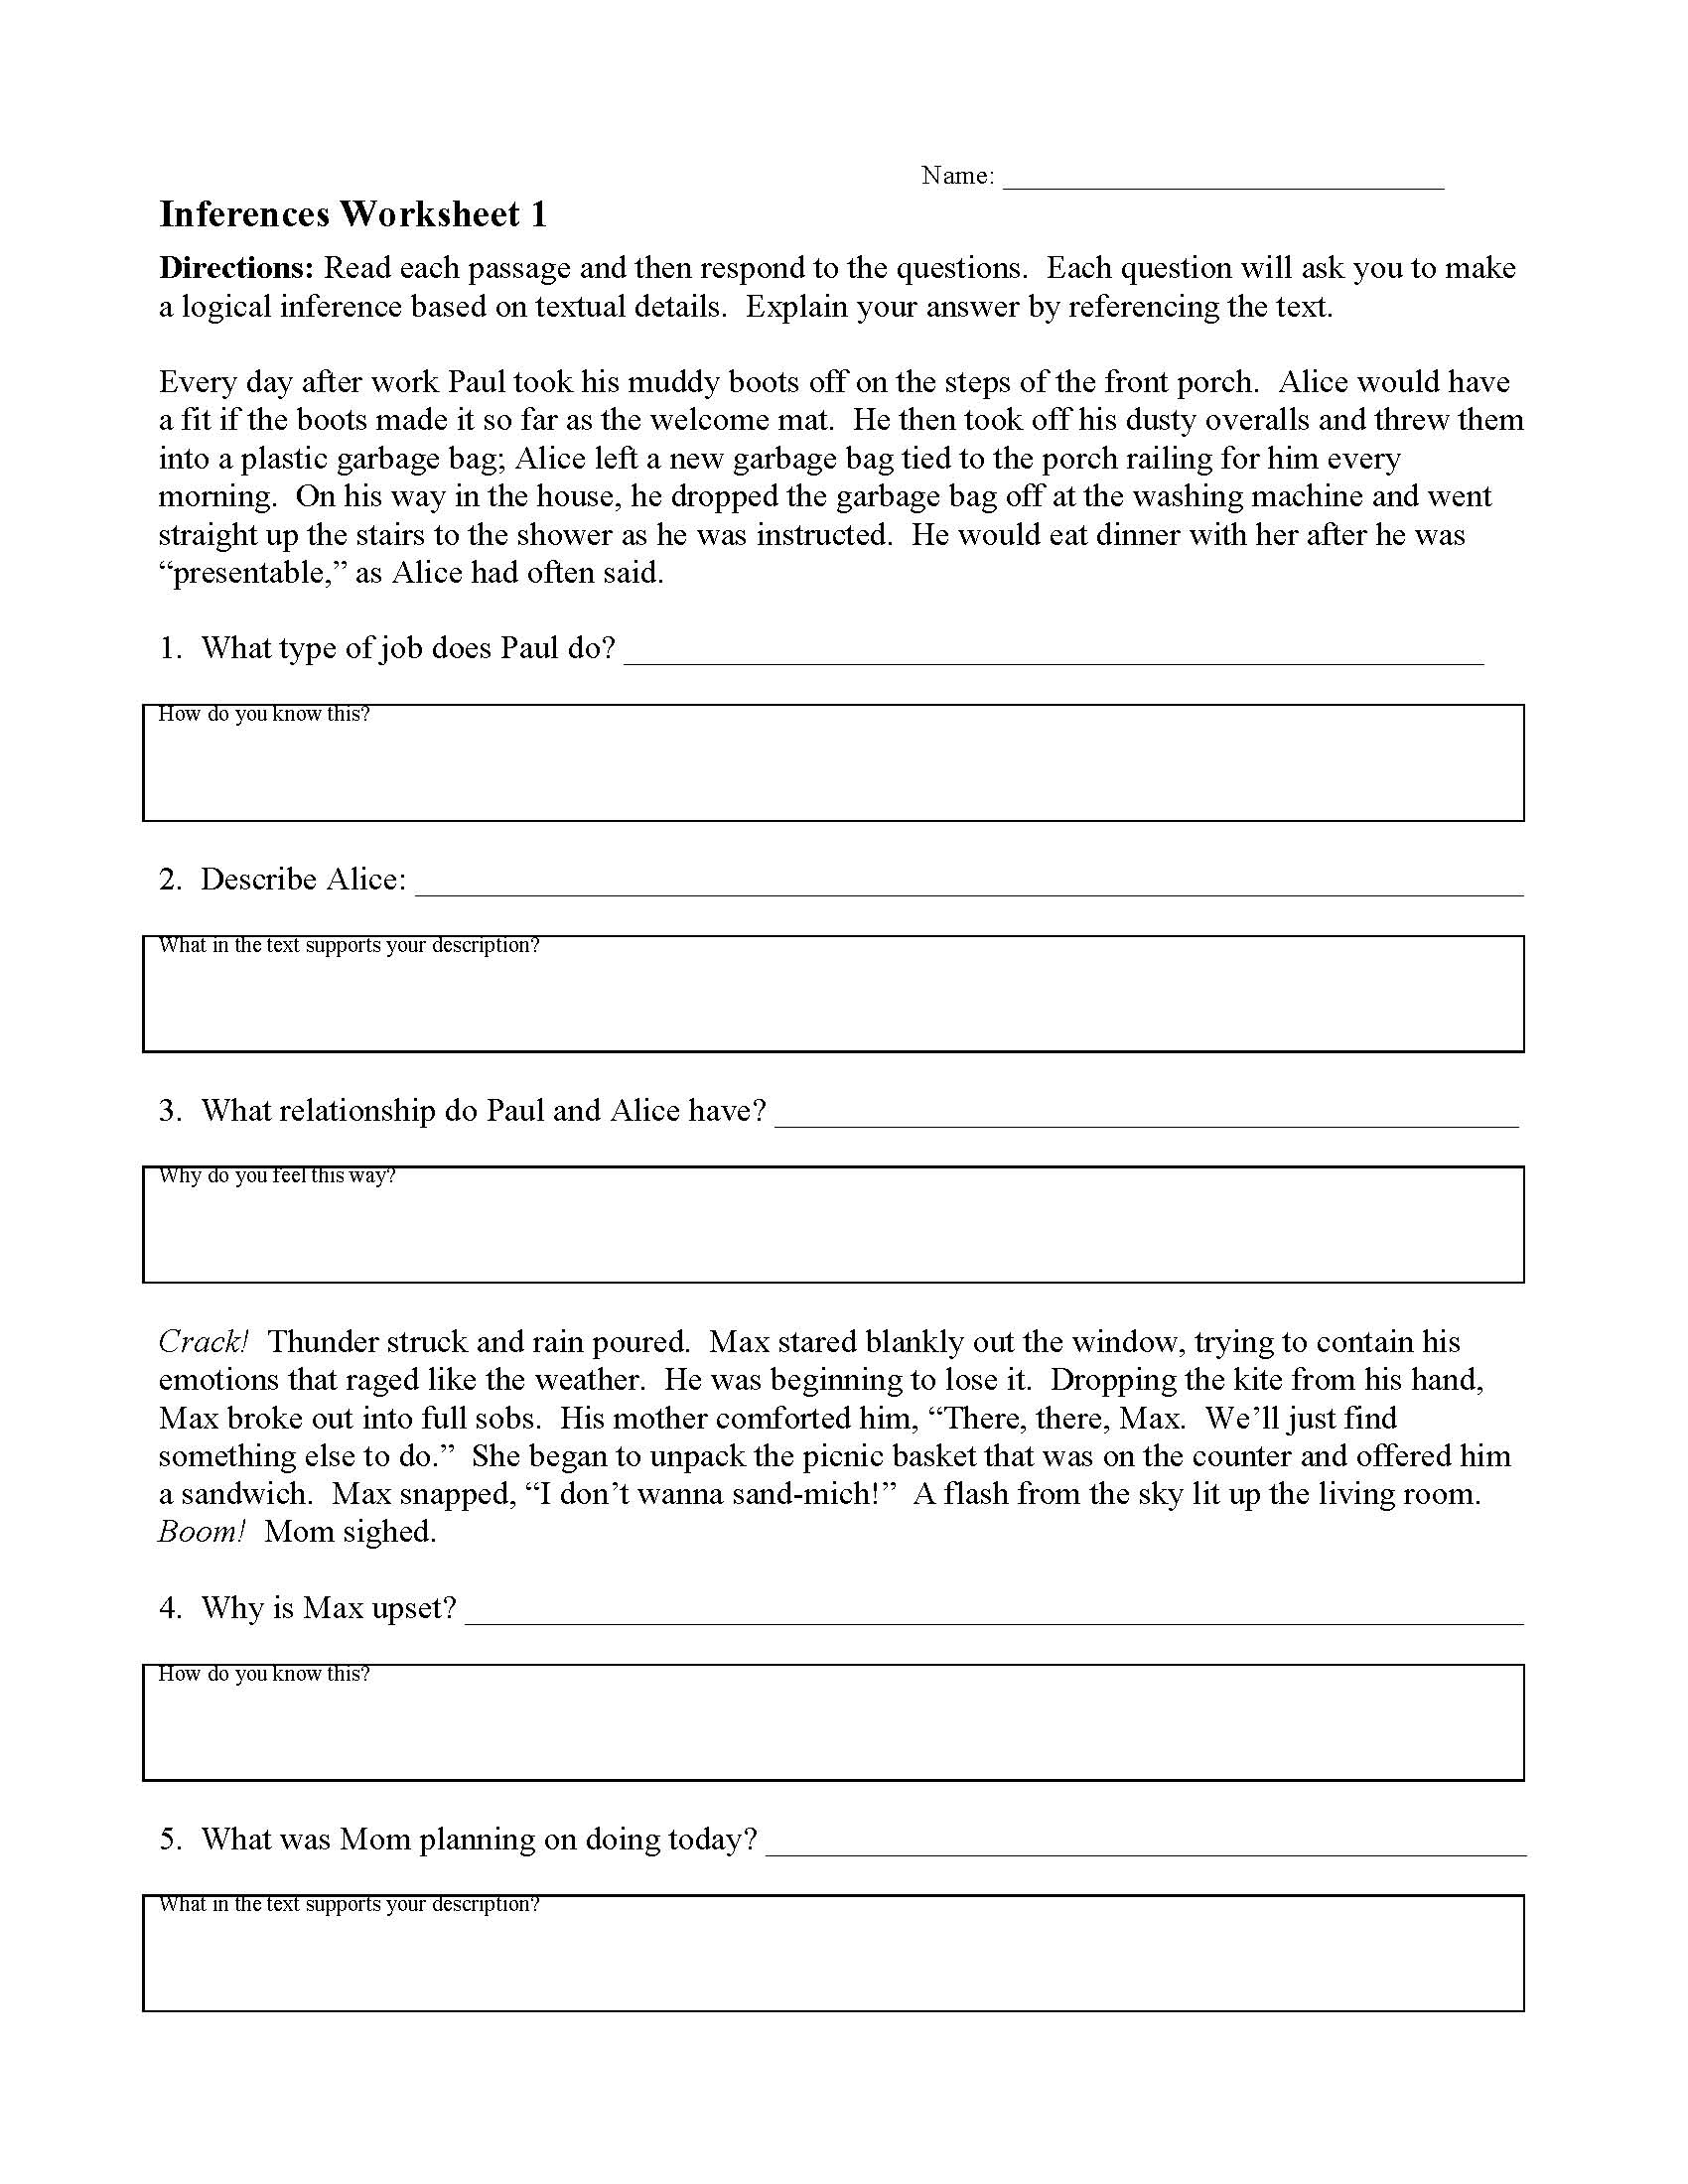 reading-comprehension-worksheets-with-multiple-choice-questions